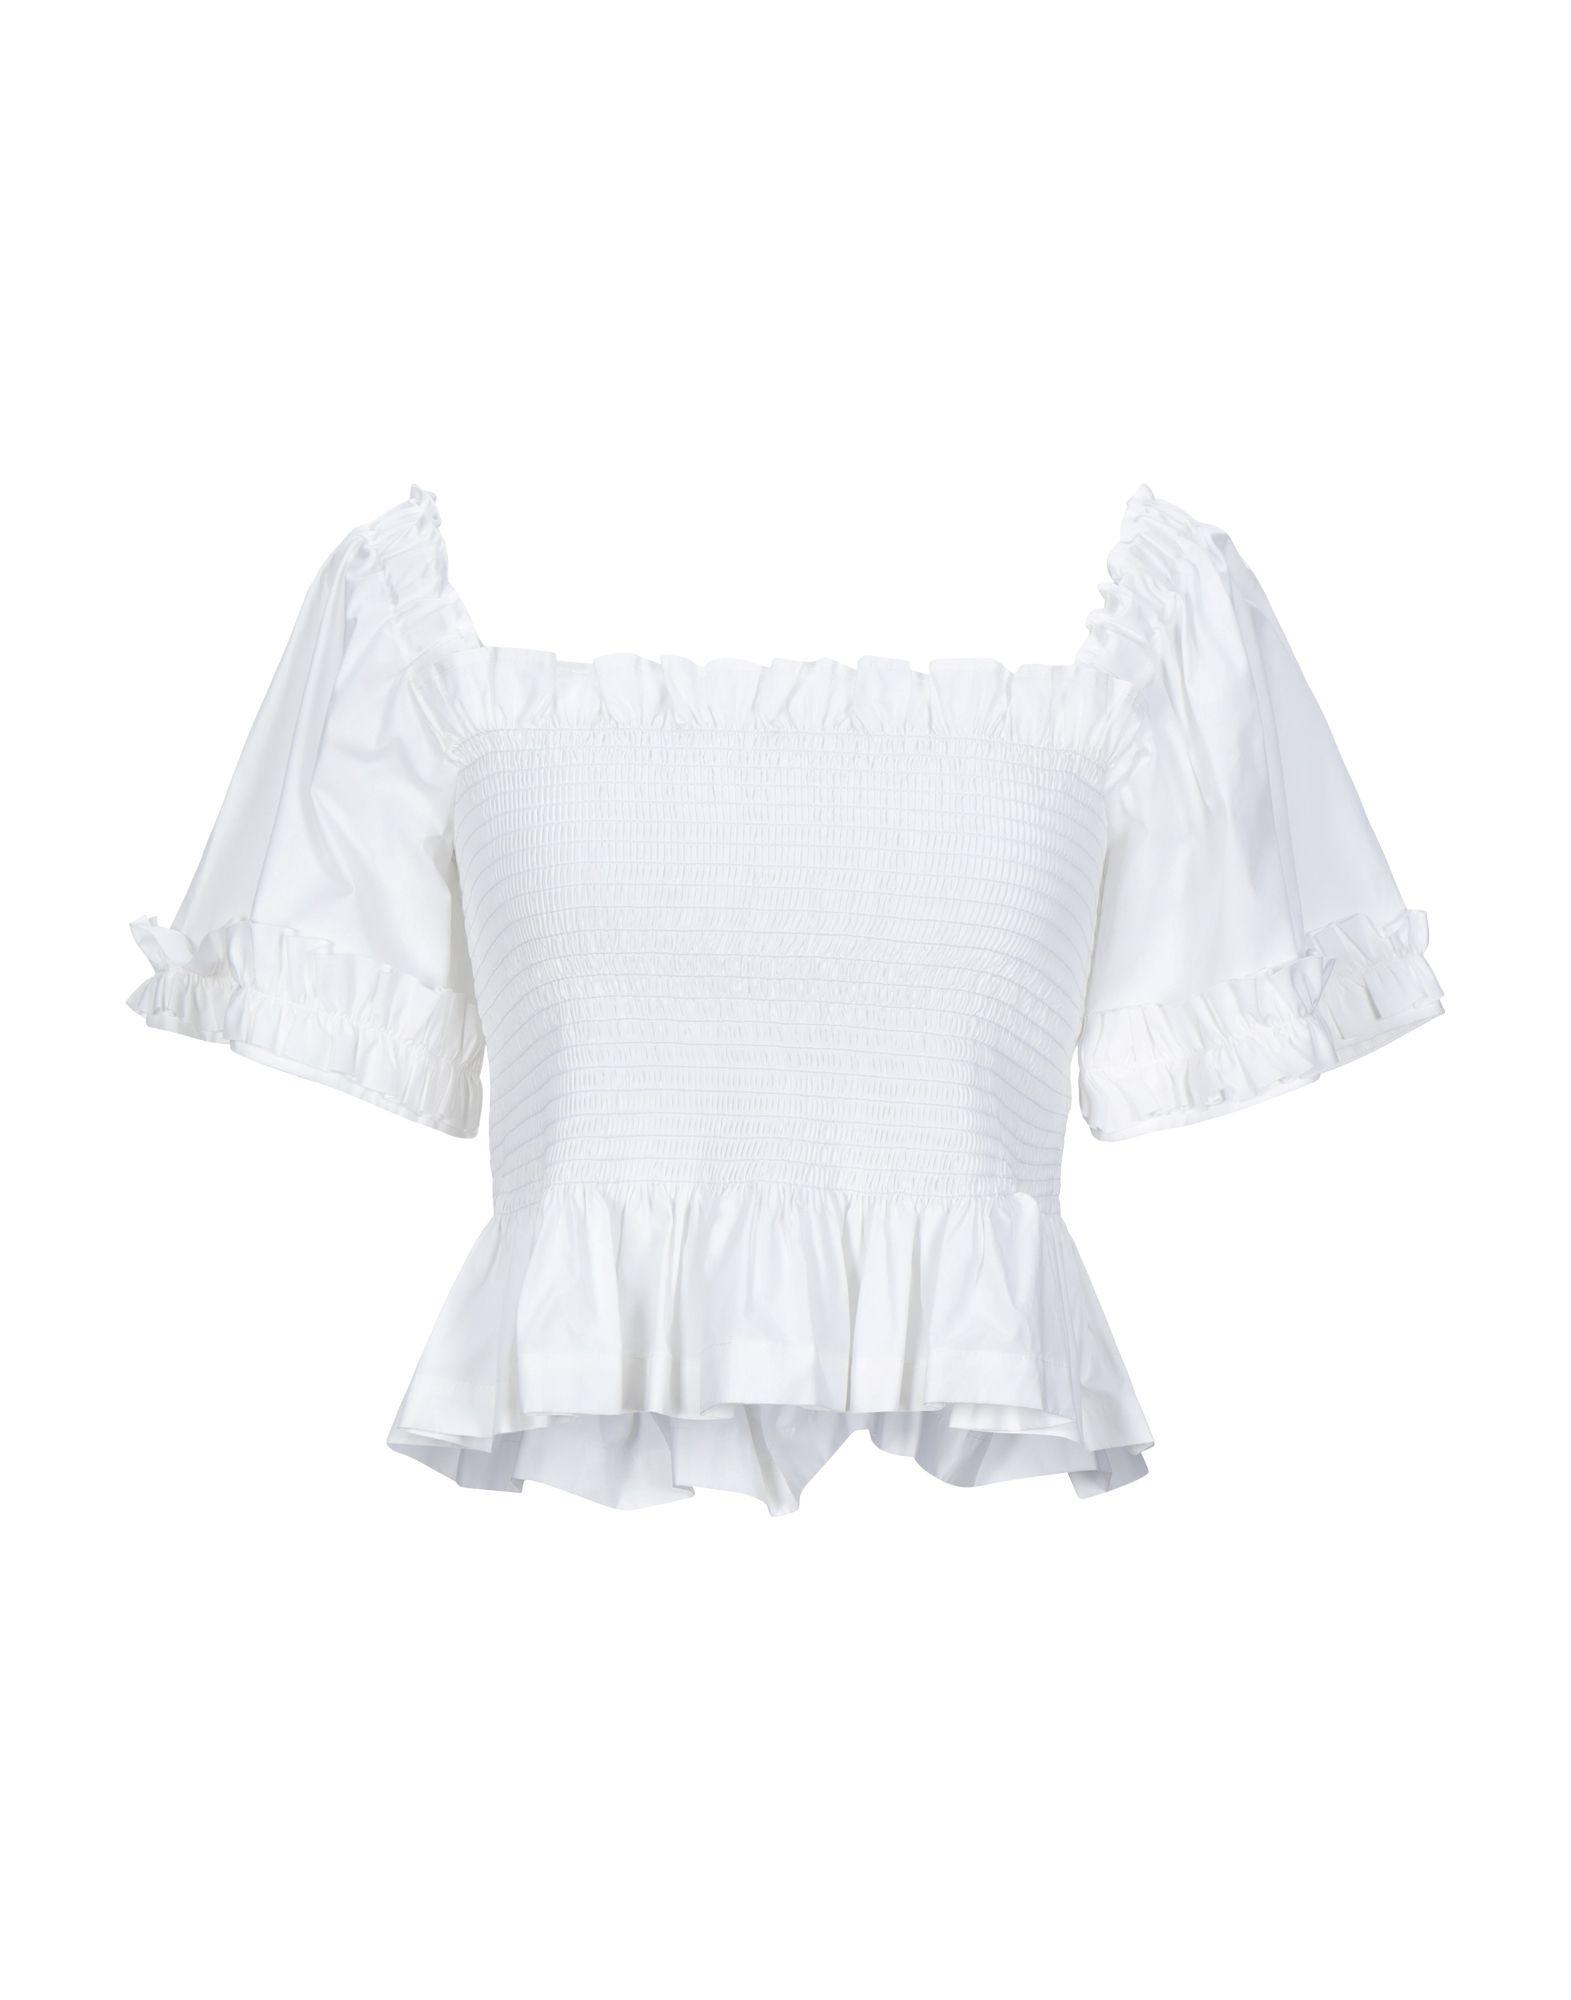 Molly Goddard Cotton Blouse in White - Lyst